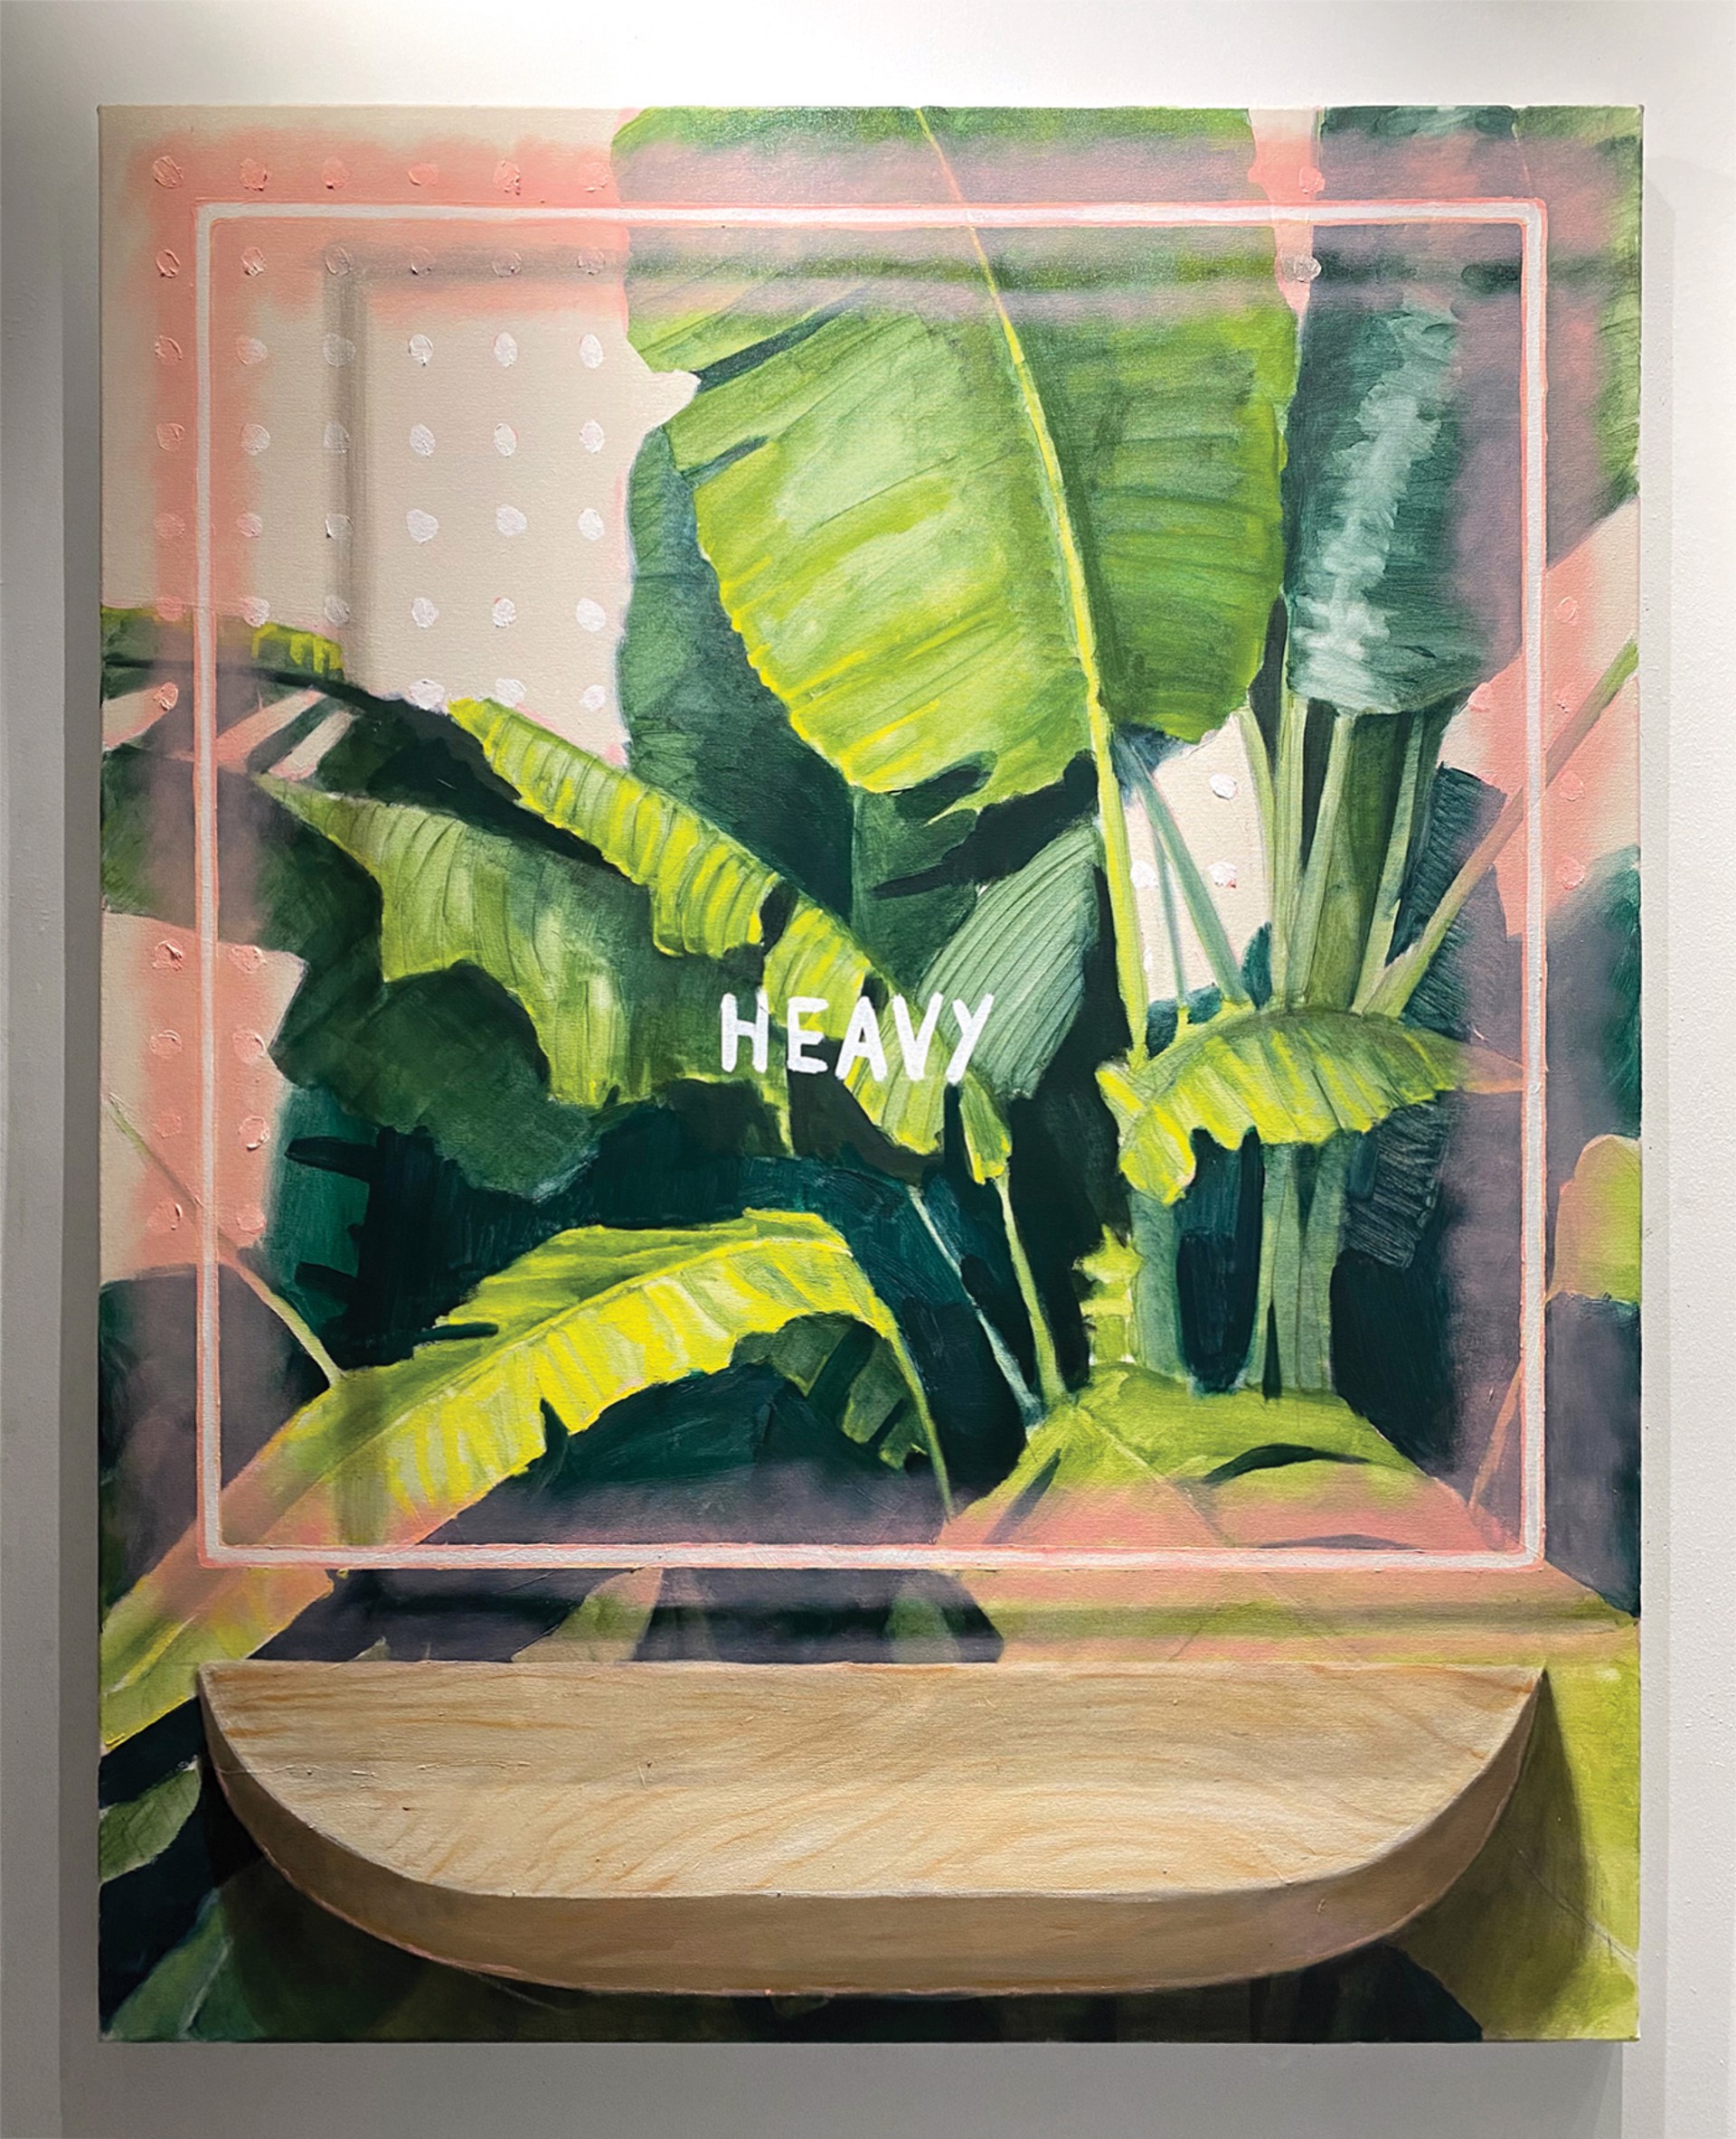 Untitled (Heavy Neon) by Russ Noto